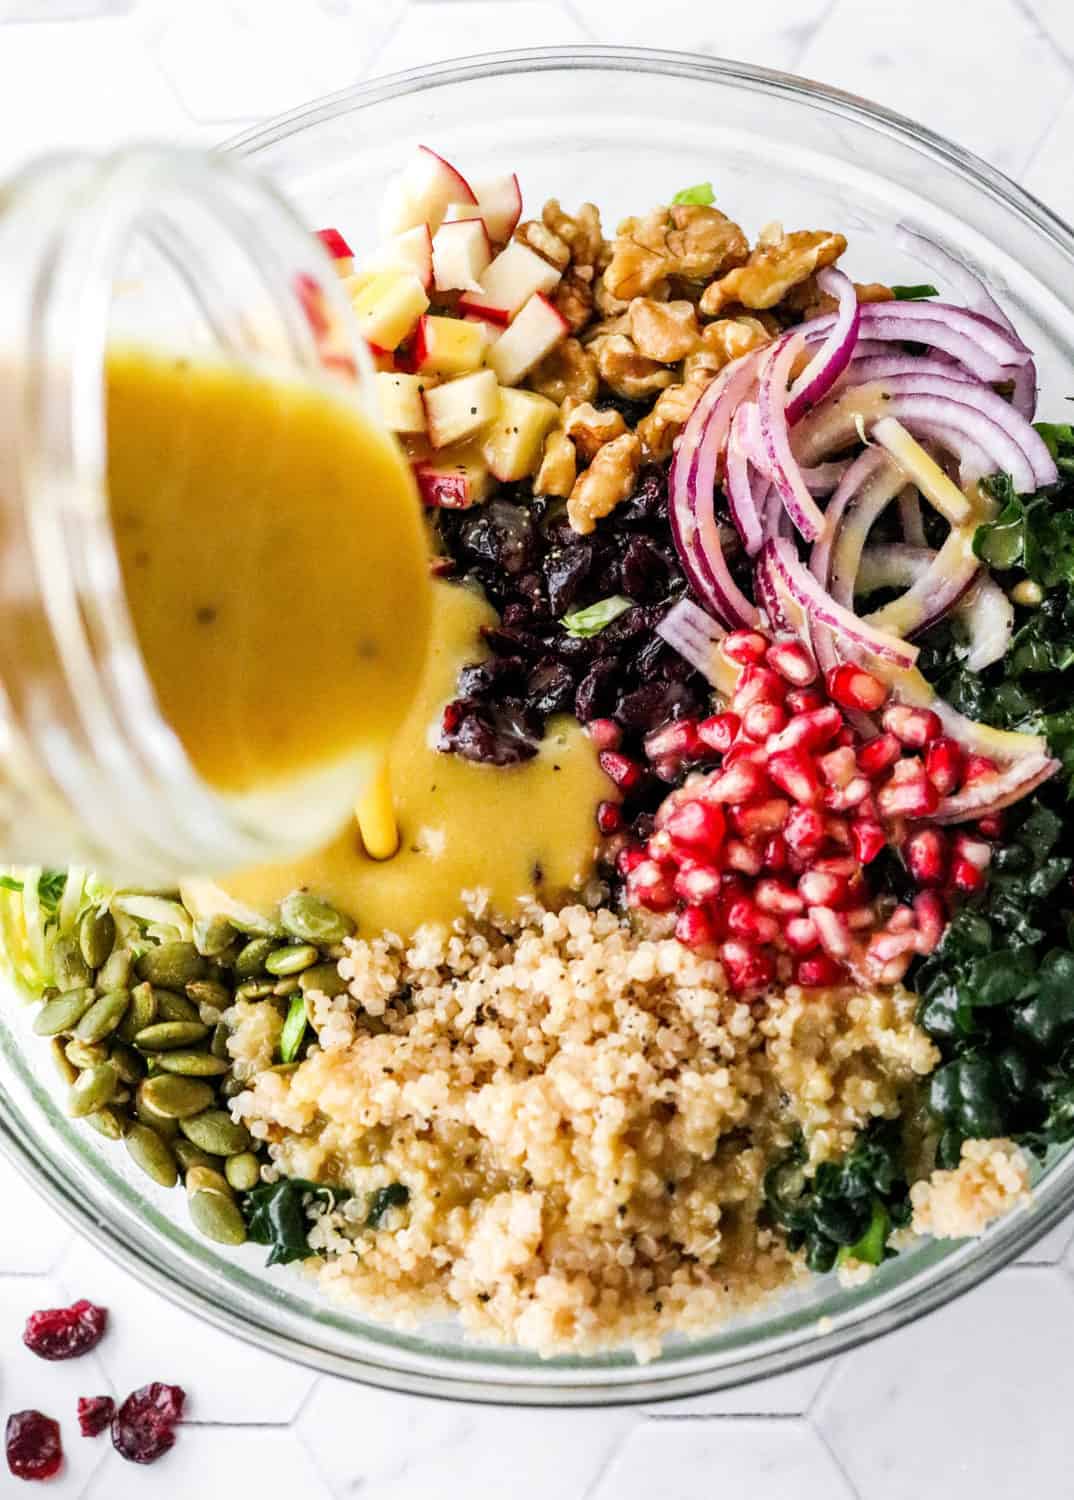 Jar pouring yellow dijon dressing over a bowl filled with kale, nuts, pomegranate seeds, cranberries and quinoa. 